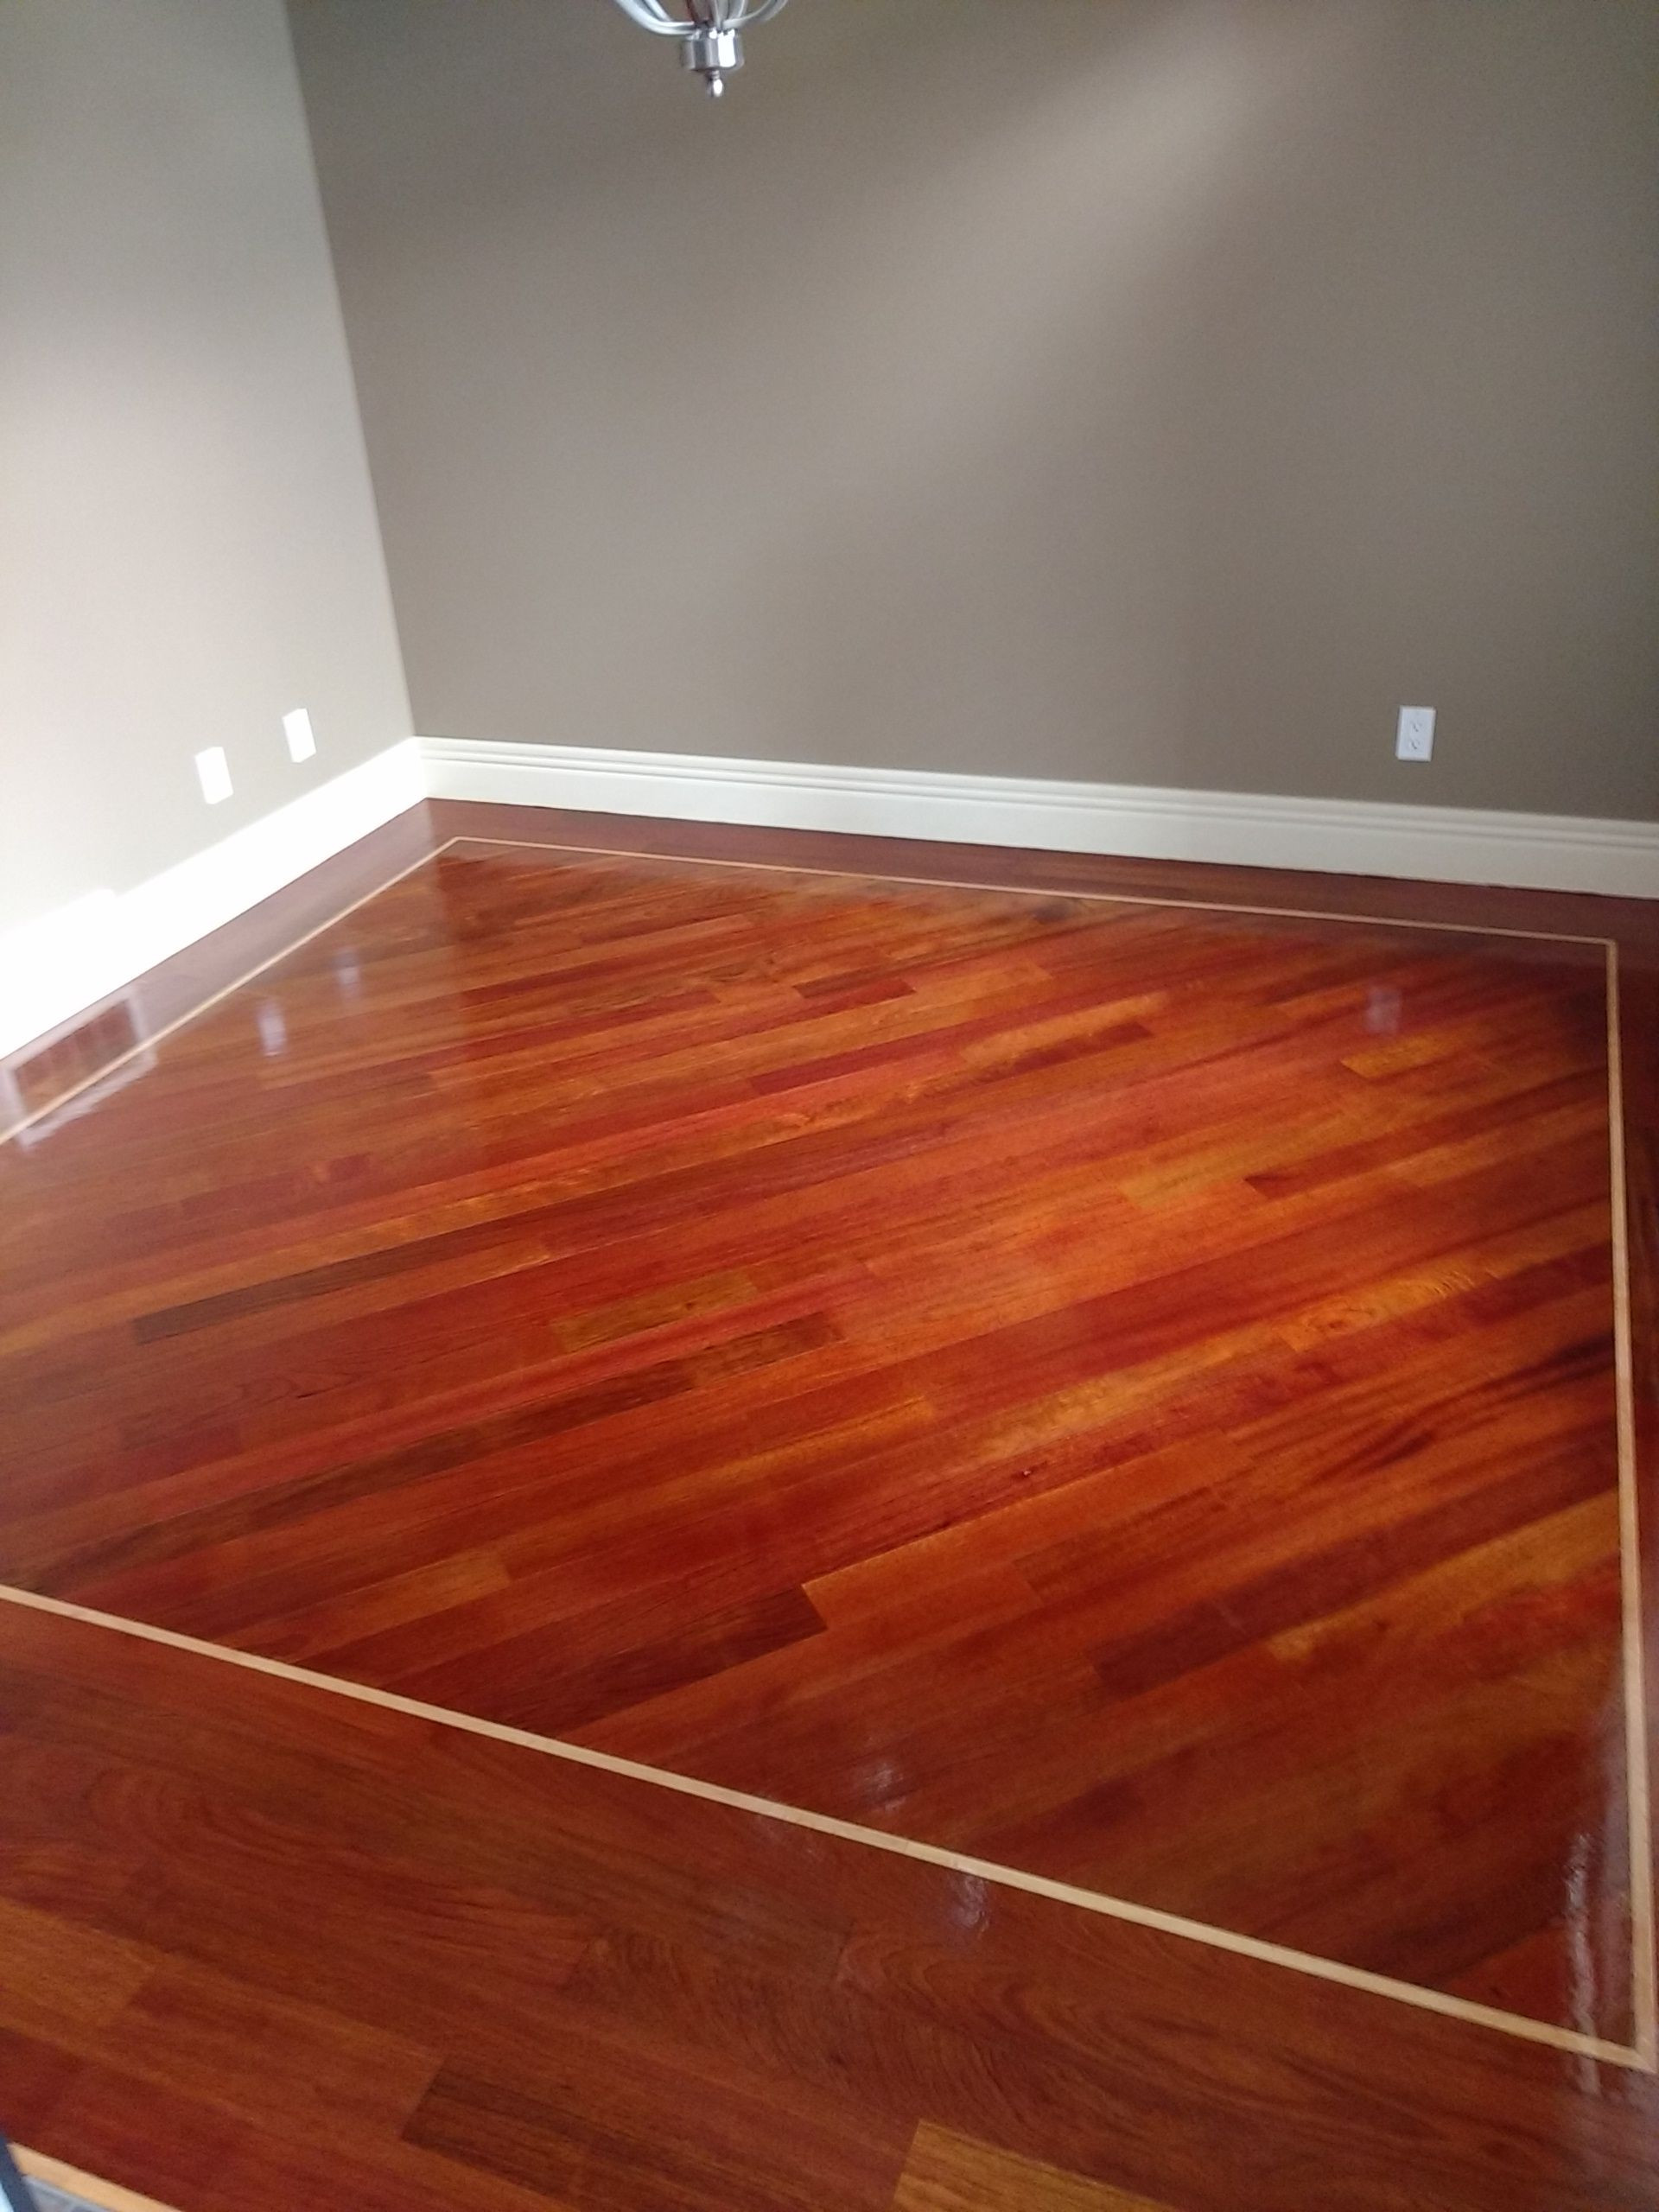 10 Unique Hardwood Flooring Types Pros and Cons 2024 free download hardwood flooring types pros and cons of brazilian cherry jatoba site finished 1 of 3 coats looks good pertaining to brazilian cherry jatoba site finished 1 of 3 coats looks good advantage h